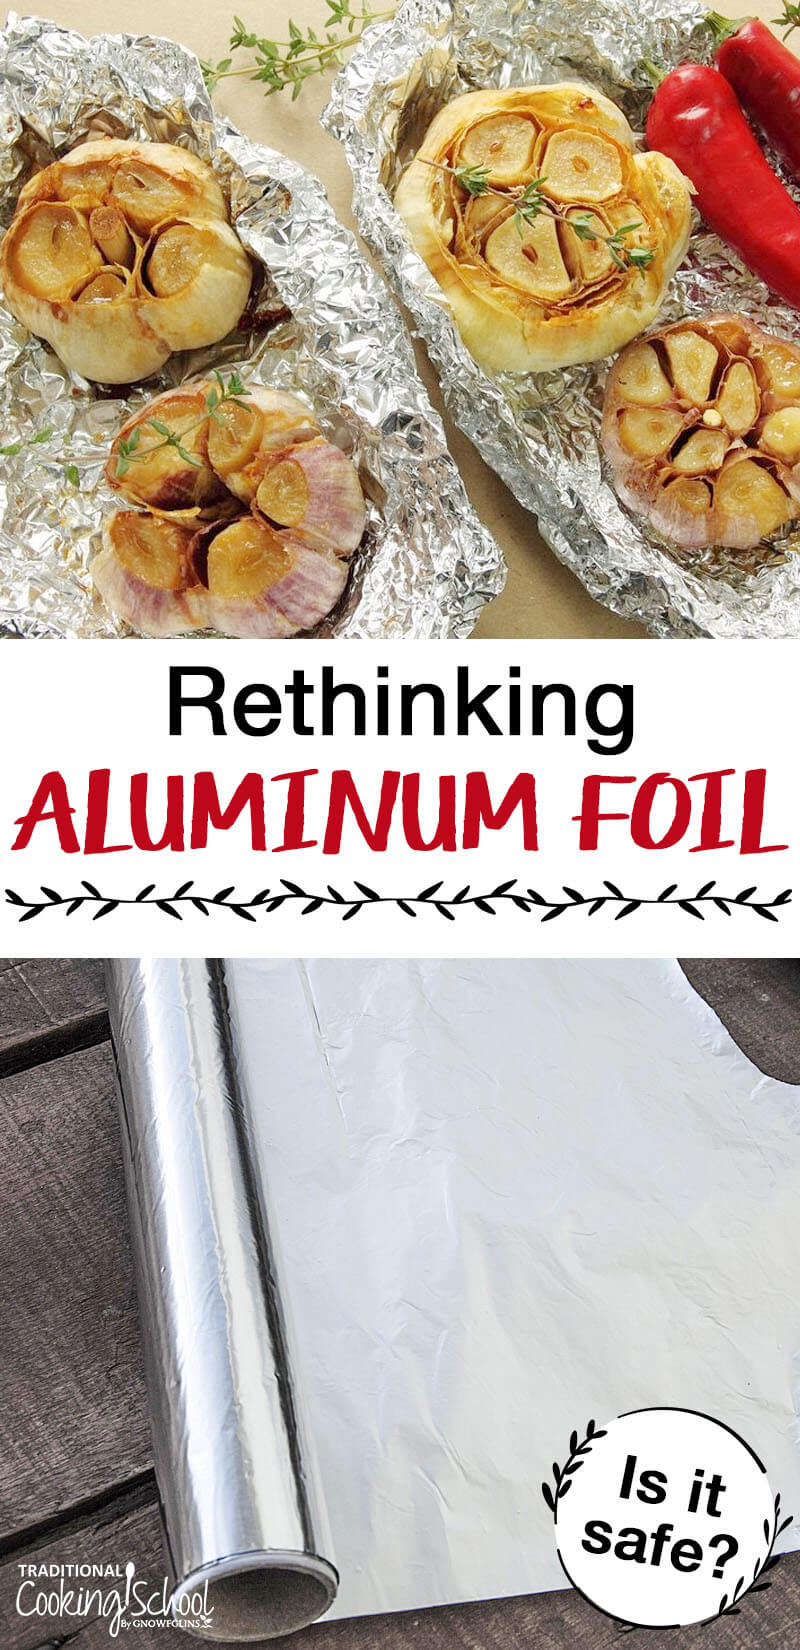 A roll of aluminum foil and garlic cooked in aluminum foil with text overlay.